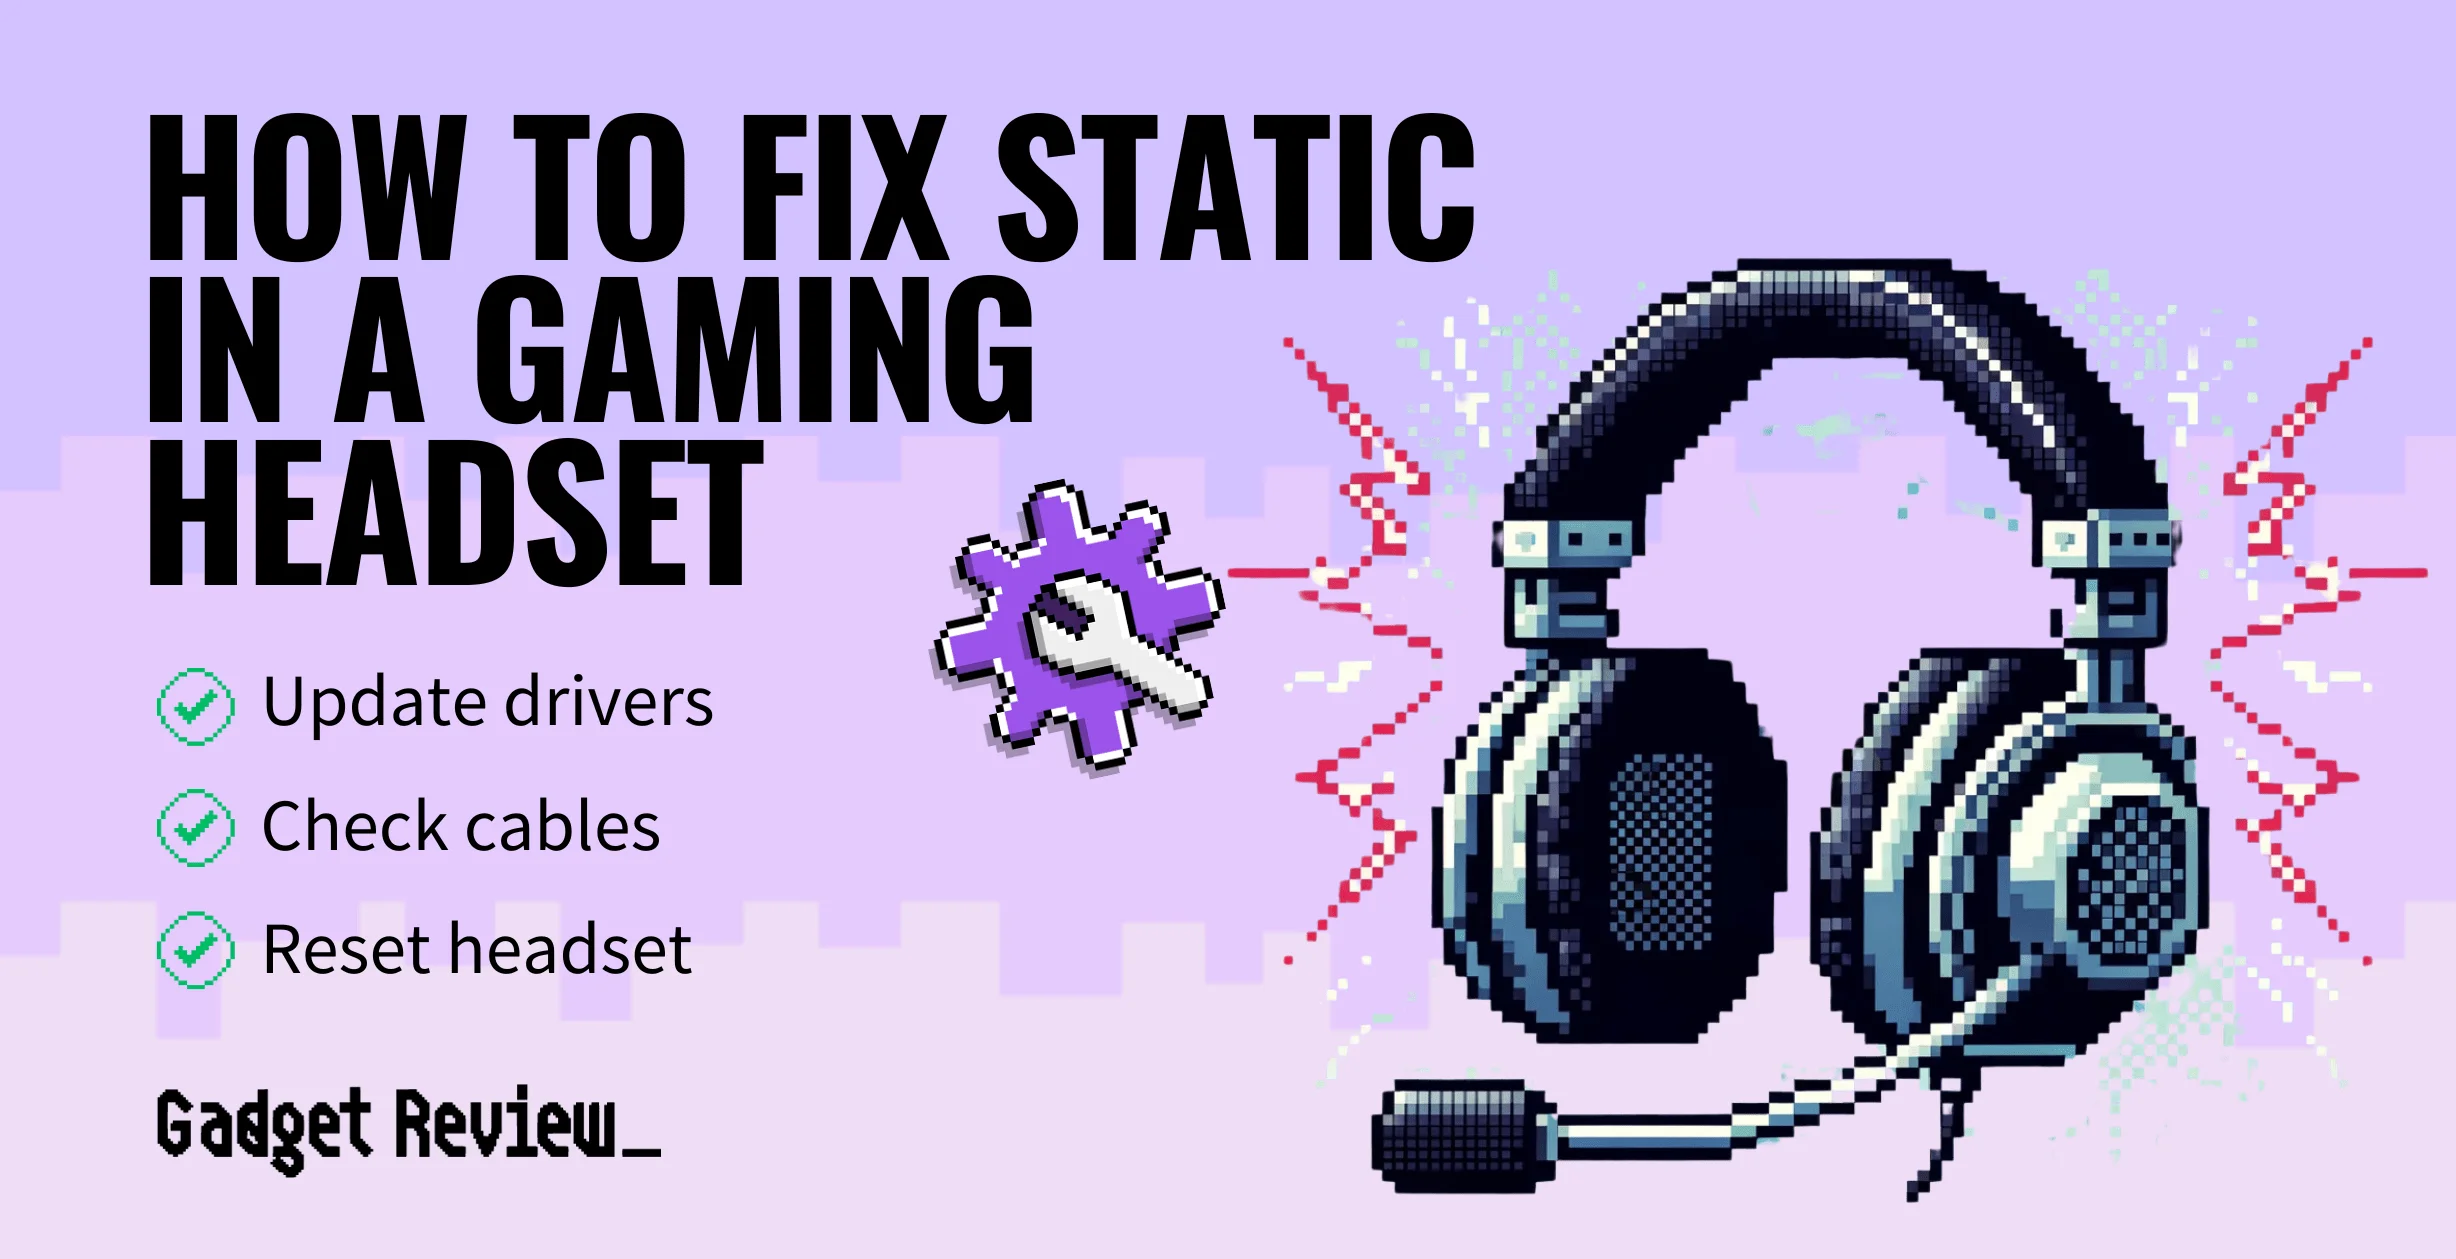 How to Fix Static in a Gaming Headset